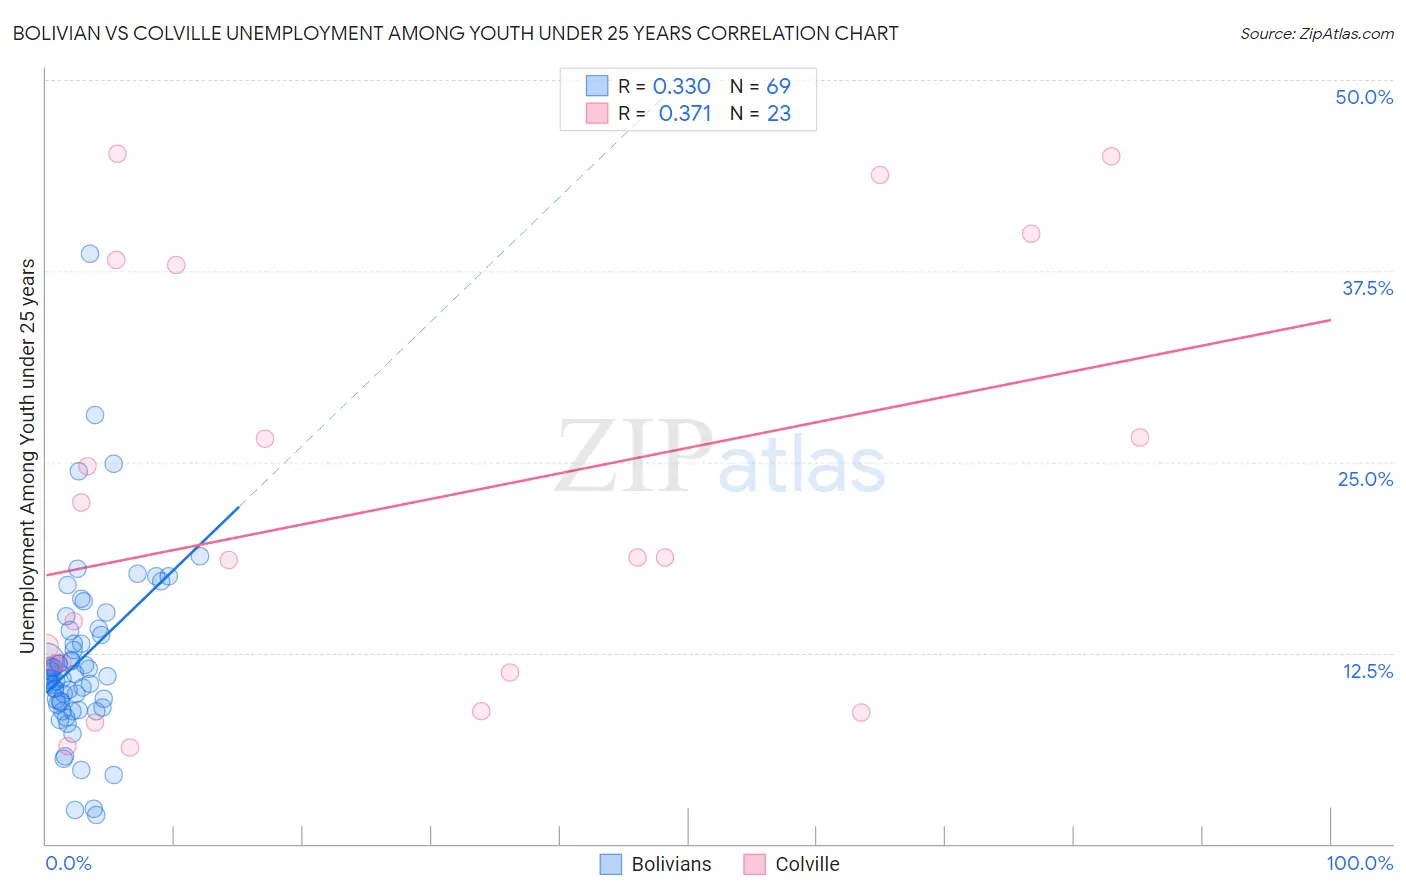 Bolivian vs Colville Unemployment Among Youth under 25 years